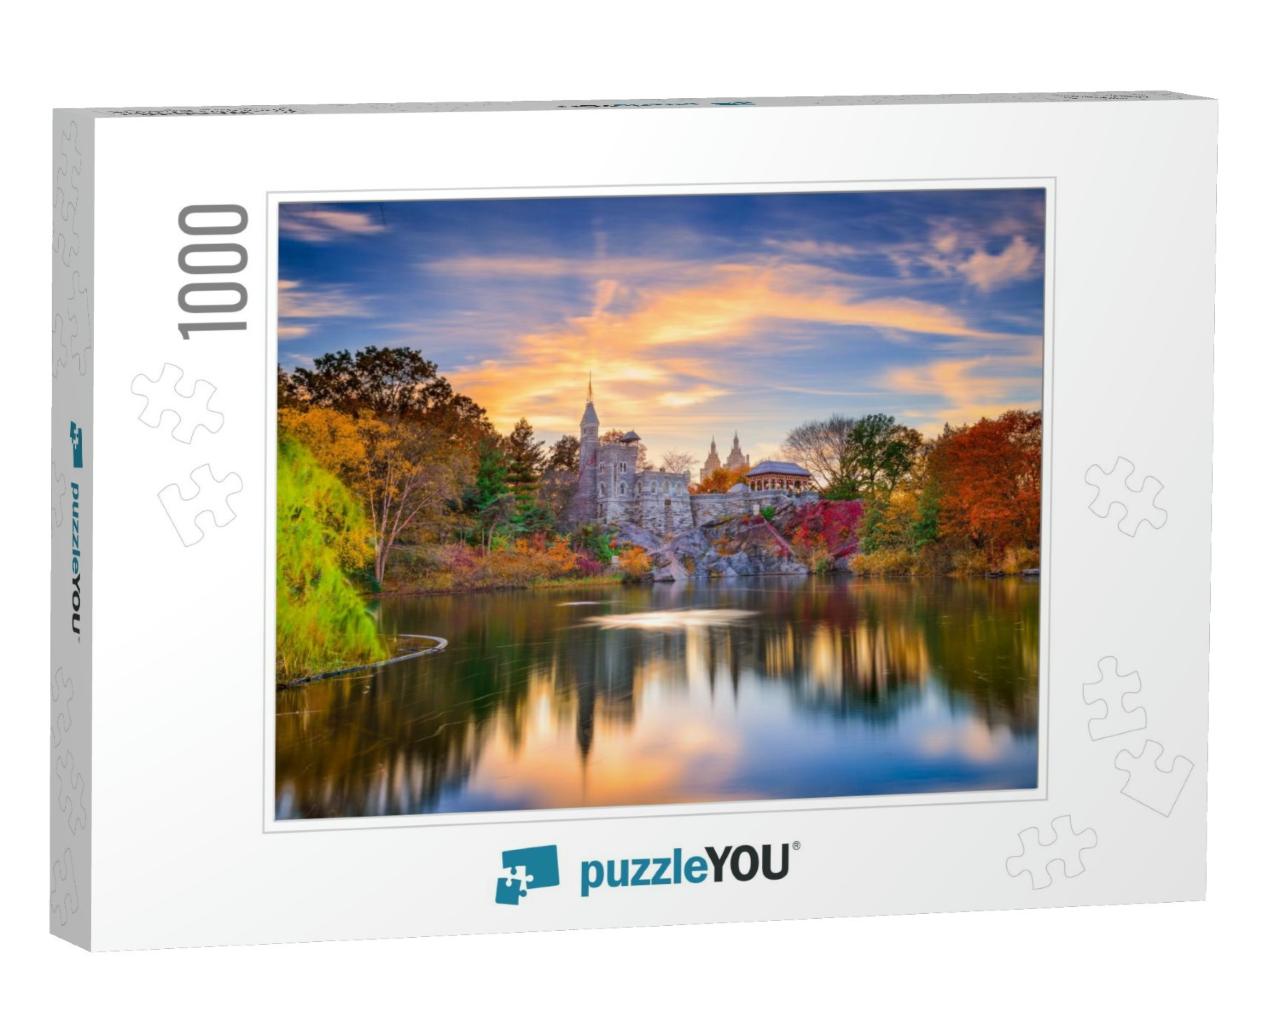 Central Park, New York City At Belvedere Castle During an... Jigsaw Puzzle with 1000 pieces